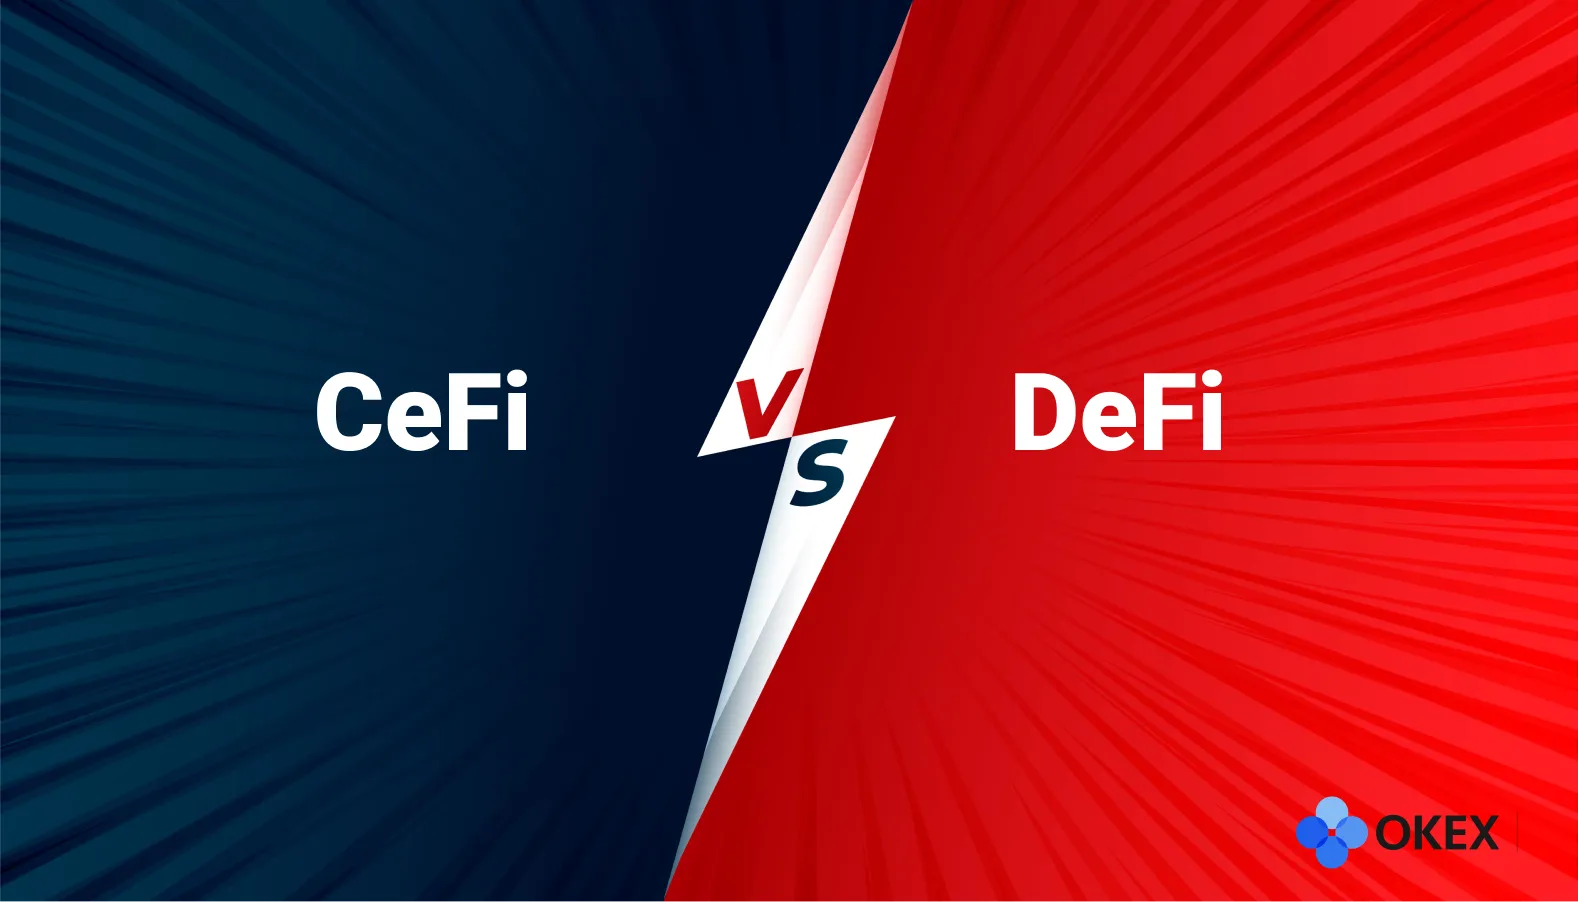 DeFi vs CeFi: What is the difference between CeFi and DeFi?